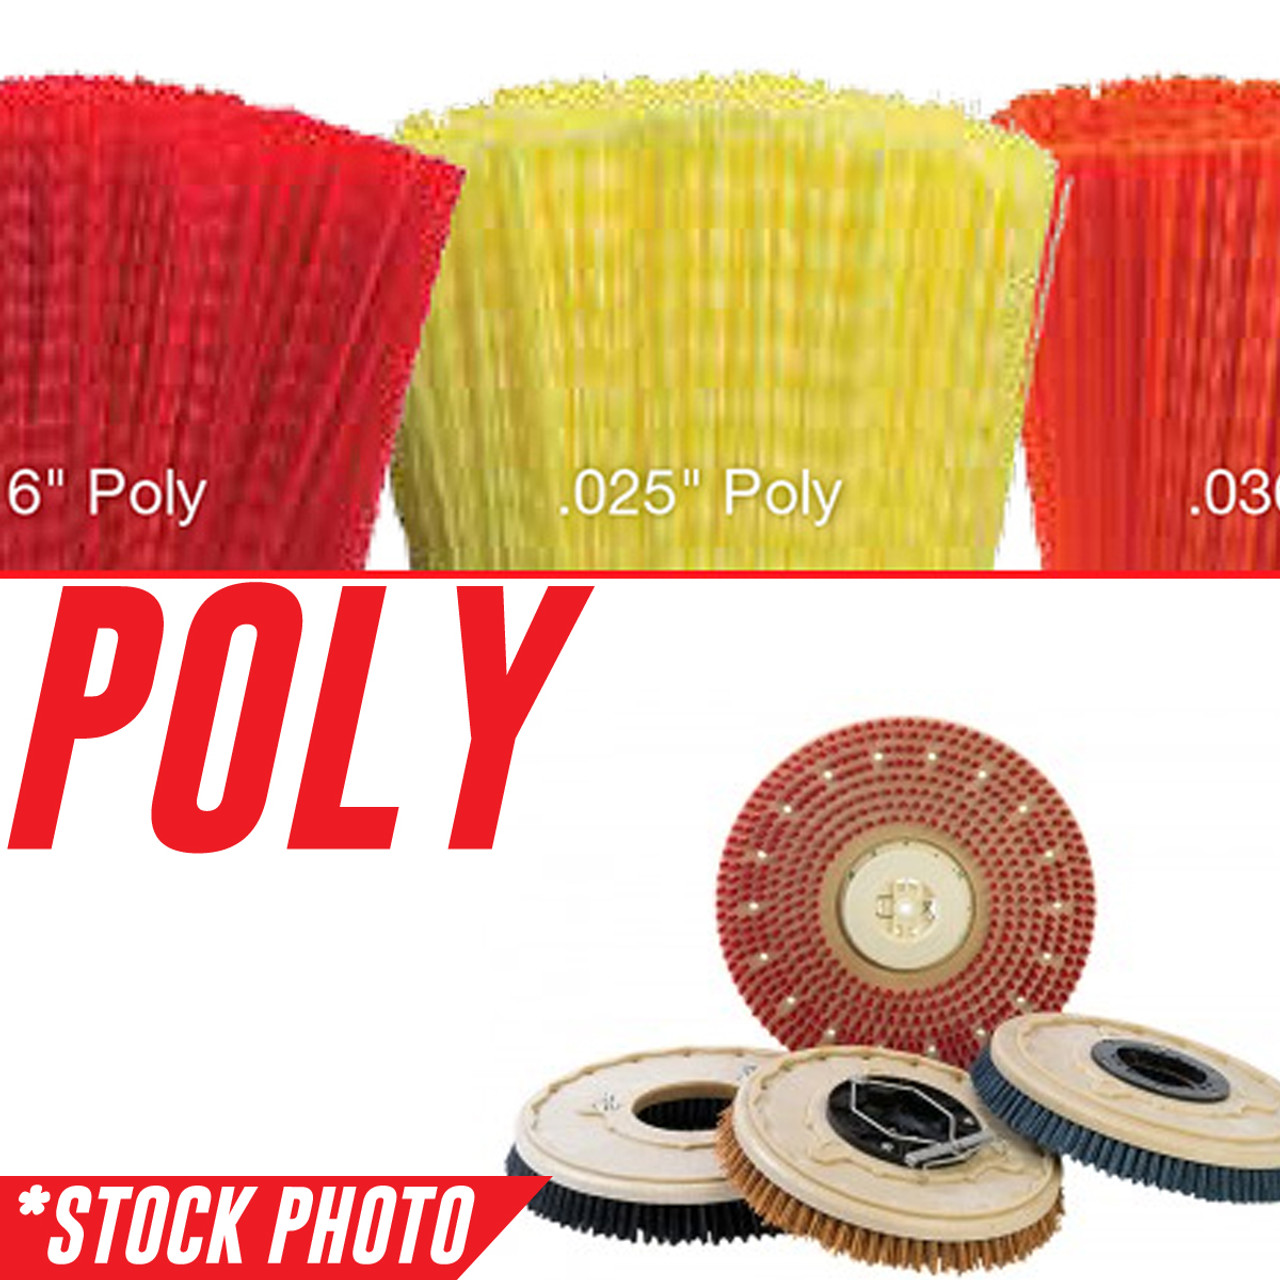 1025095, 1220180, 1220204, 385906: 11" Rotary Brush .028 Poly fits Tennant Models 5400 24", T5